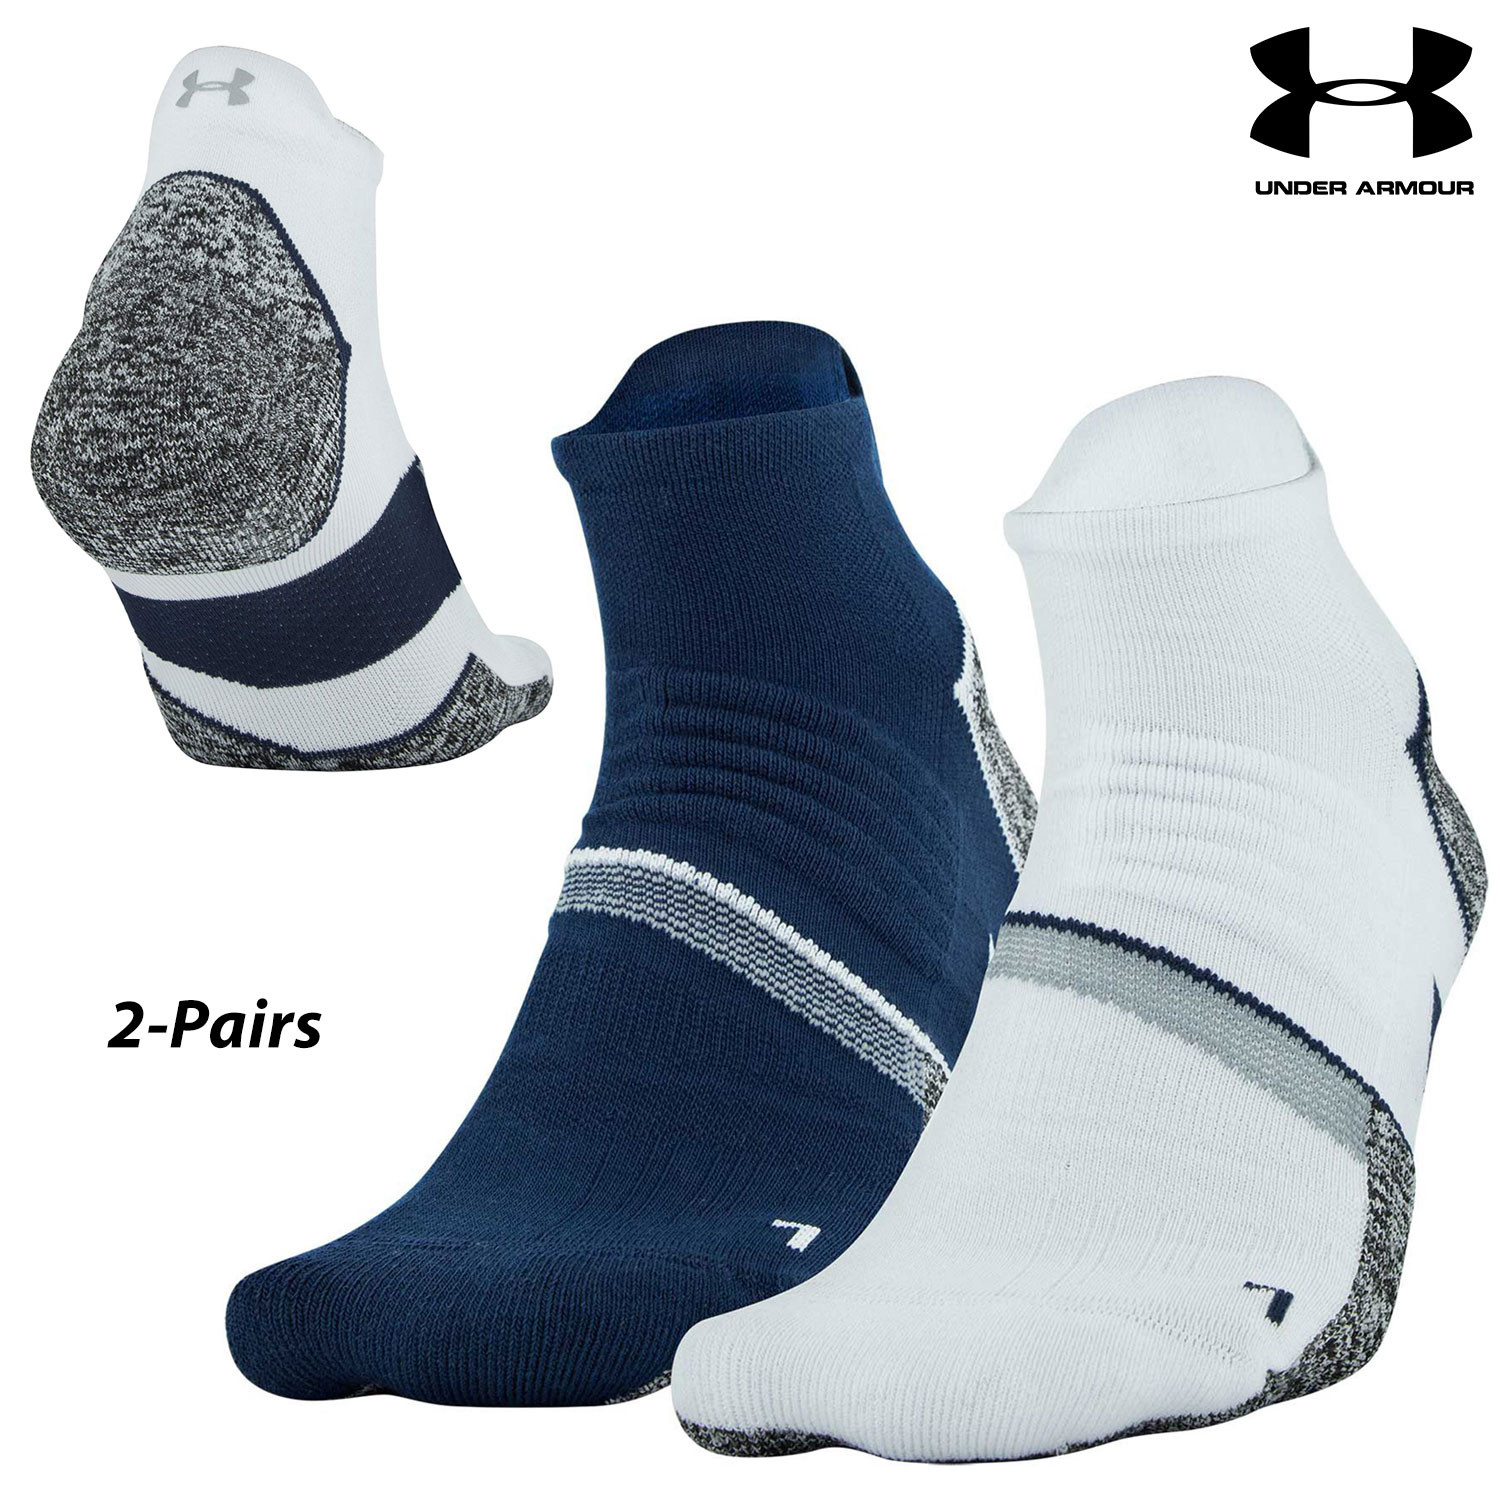 2 Pairs Under Armour Performance Golf Low-Cut Socks (L) $9.99 + Free Shipping